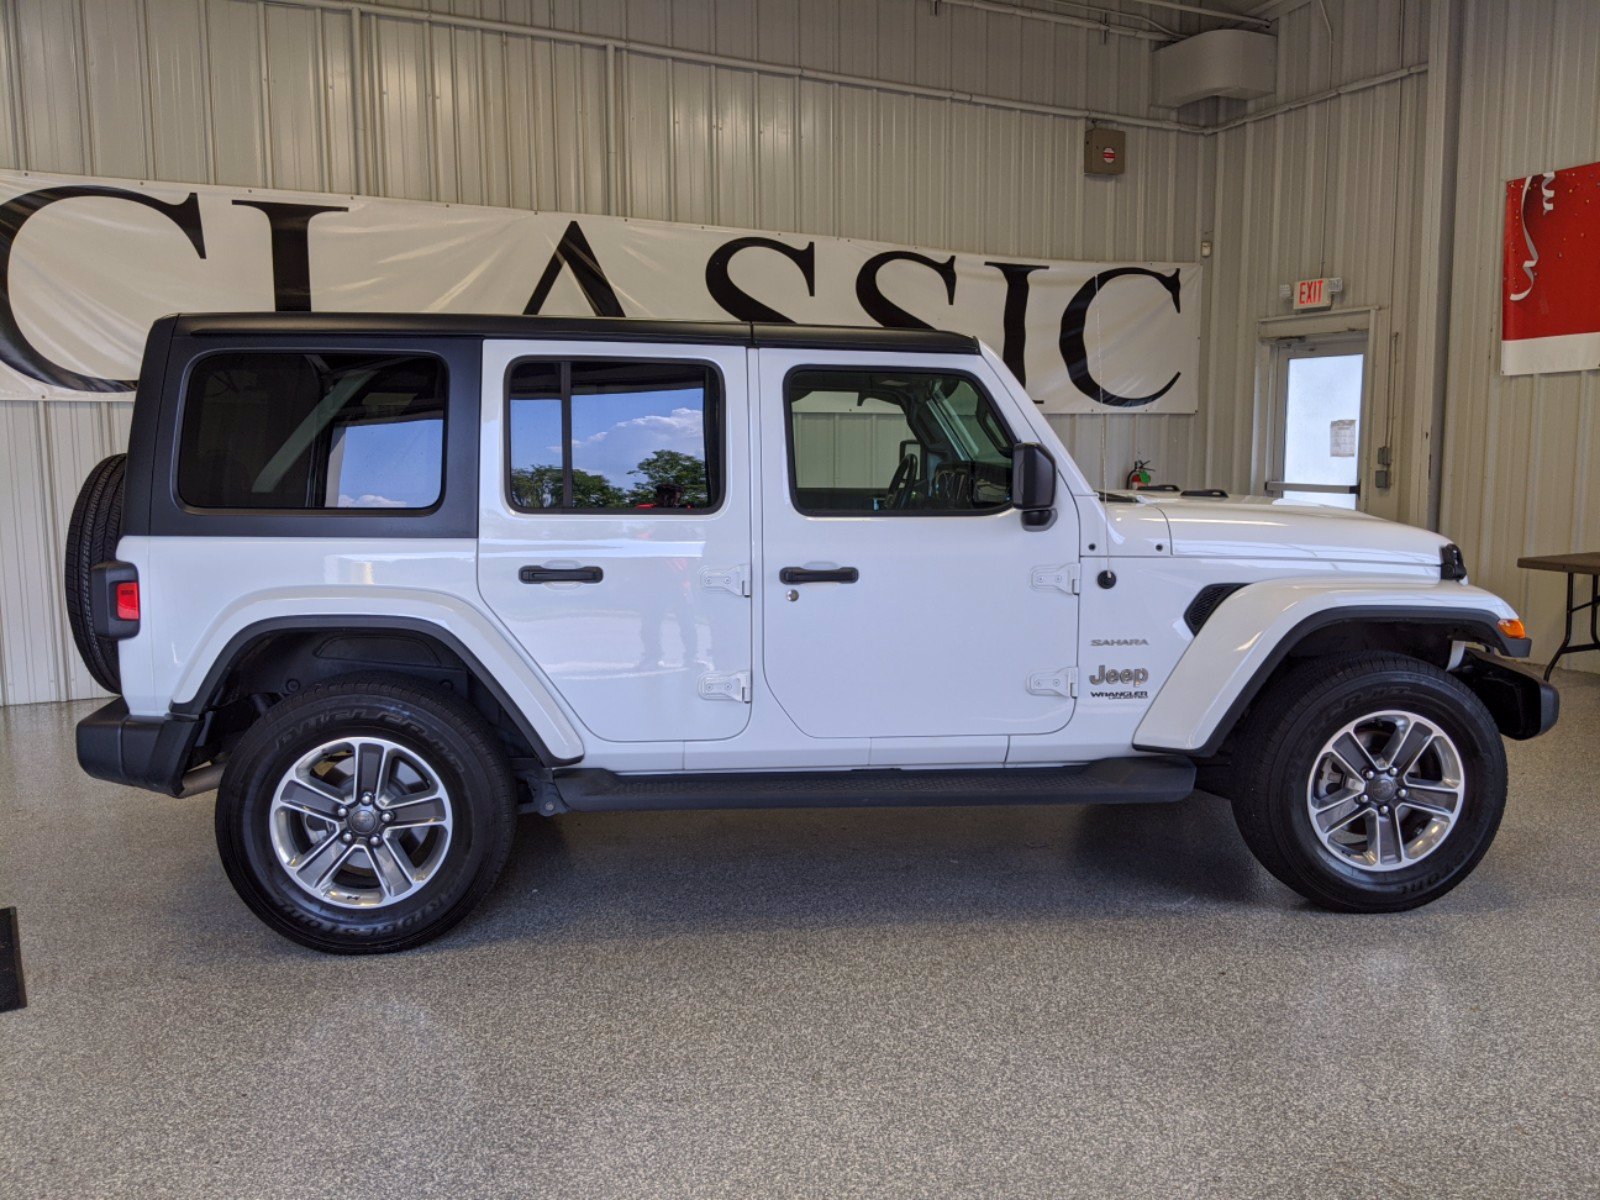 PreOwned 2020 Jeep Wrangler Unlimited Sahara 4WD Convertible